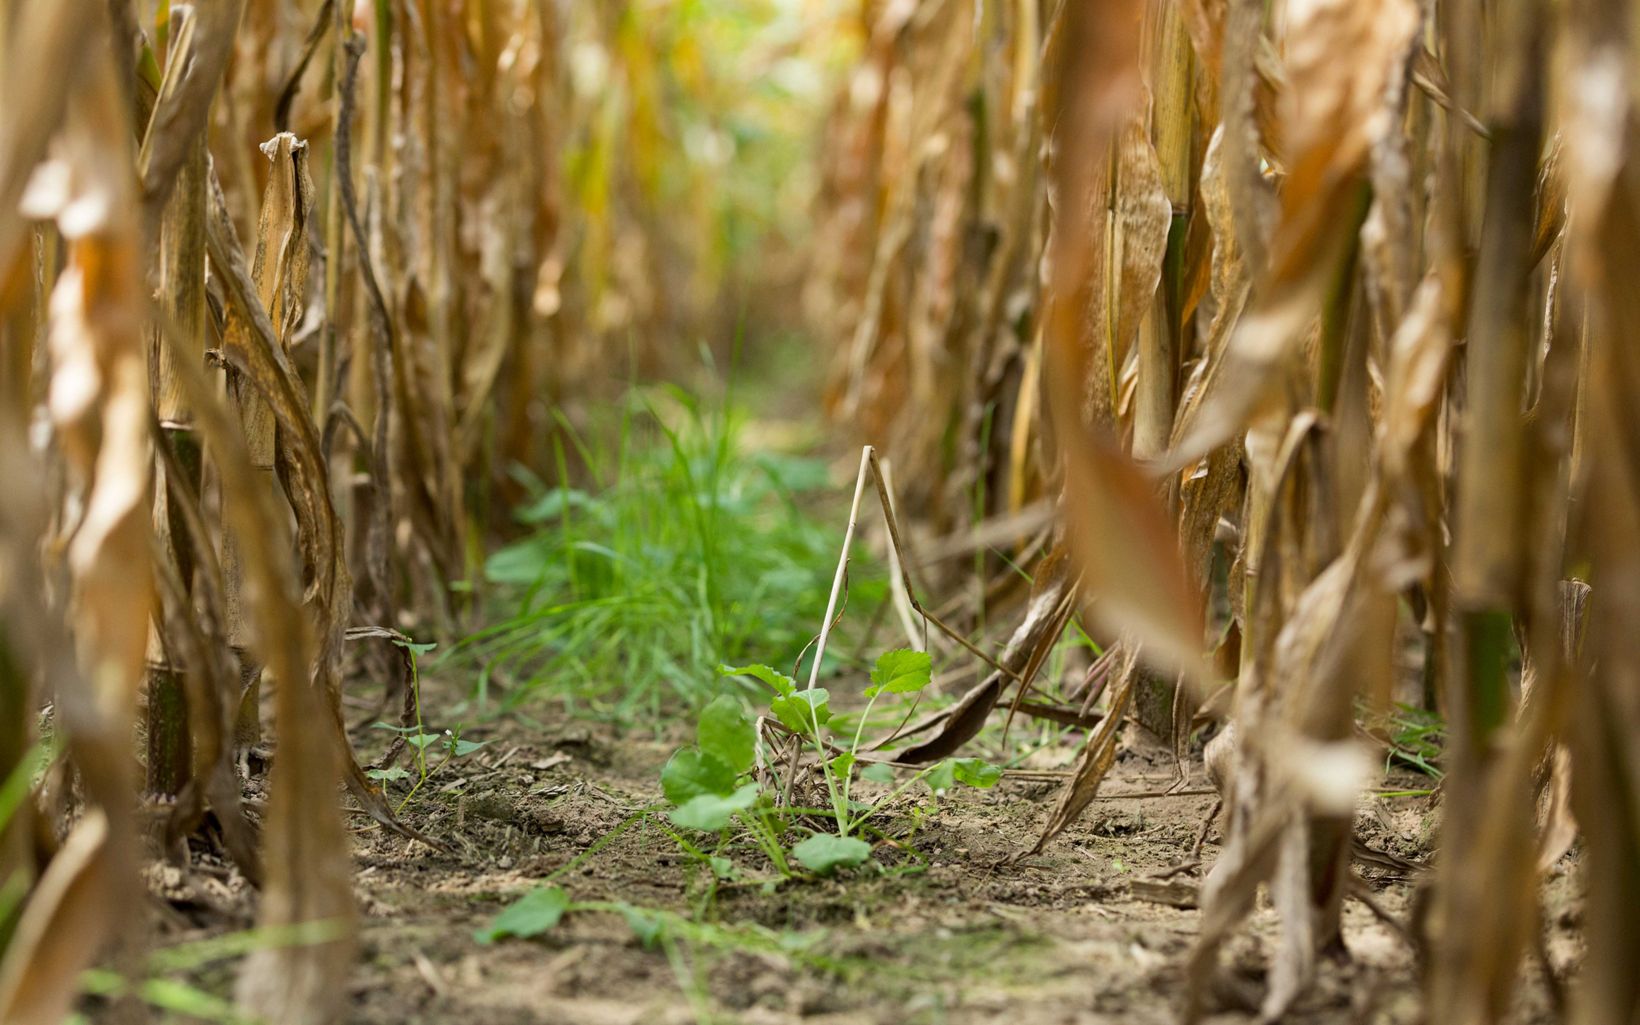 small green plants sprout between rows of dry, brown cornstalks